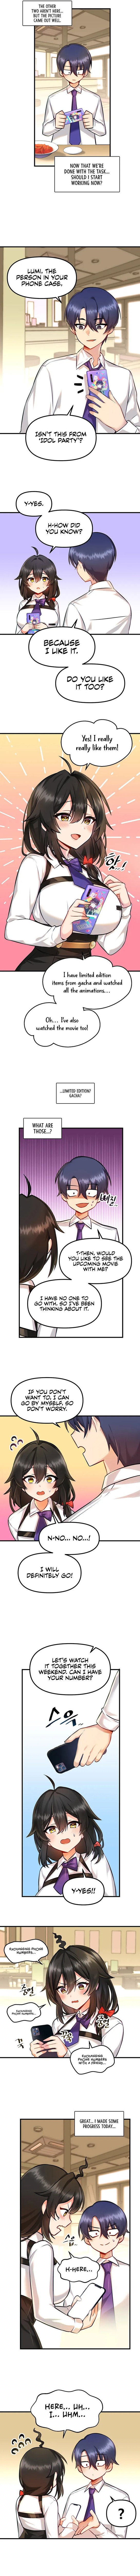 trapped-in-the-academys-eroge-chap-3-3